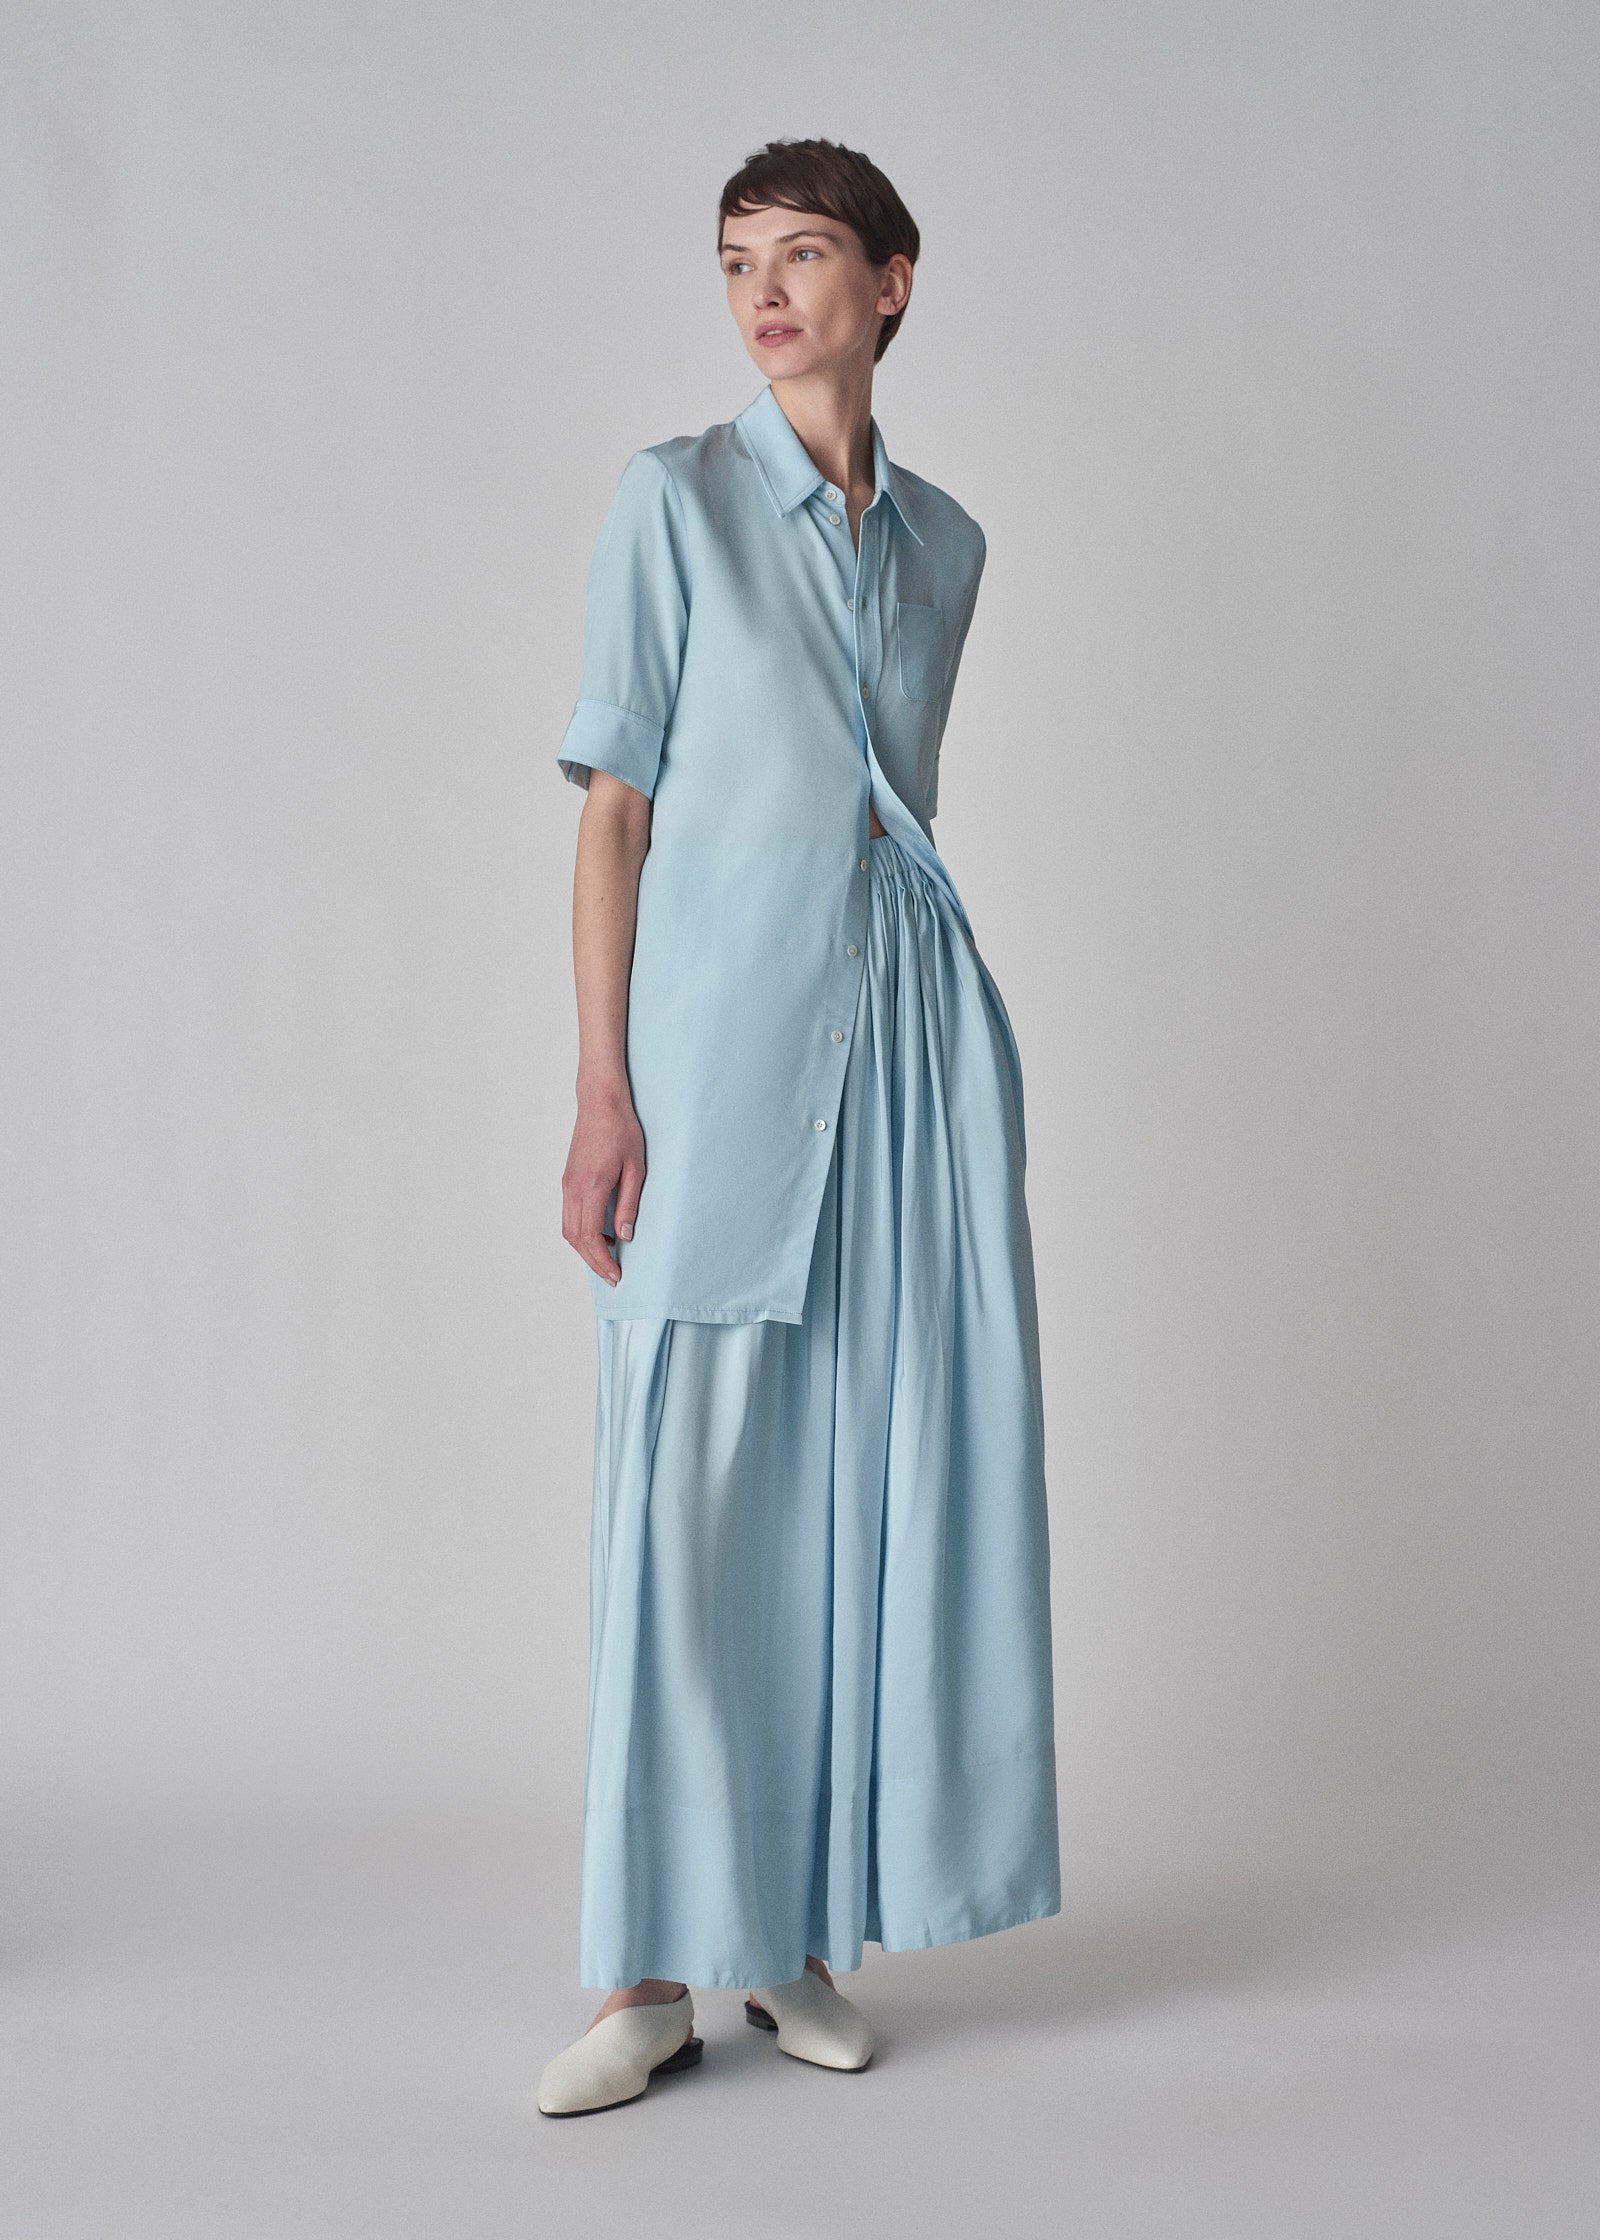 Fitted Shirtdress in Viscose Habotai - Light Blue - CO Collections